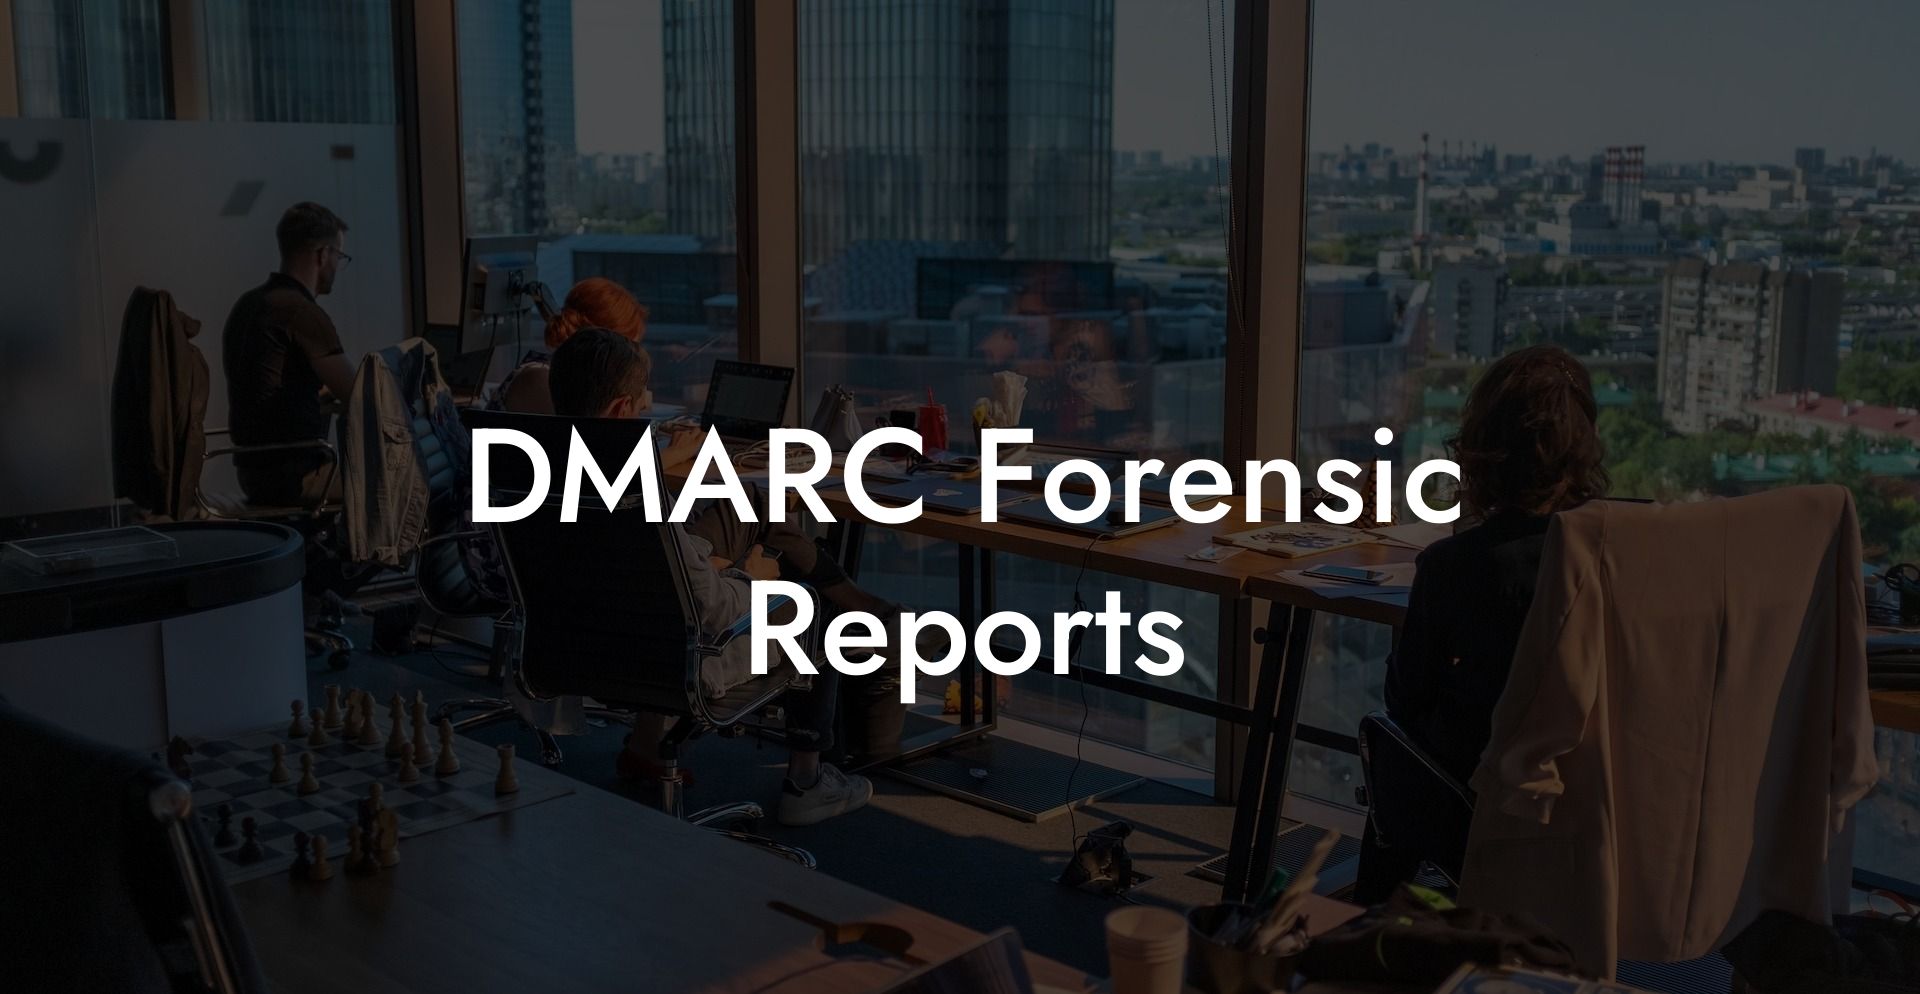 DMARC Forensic Reports